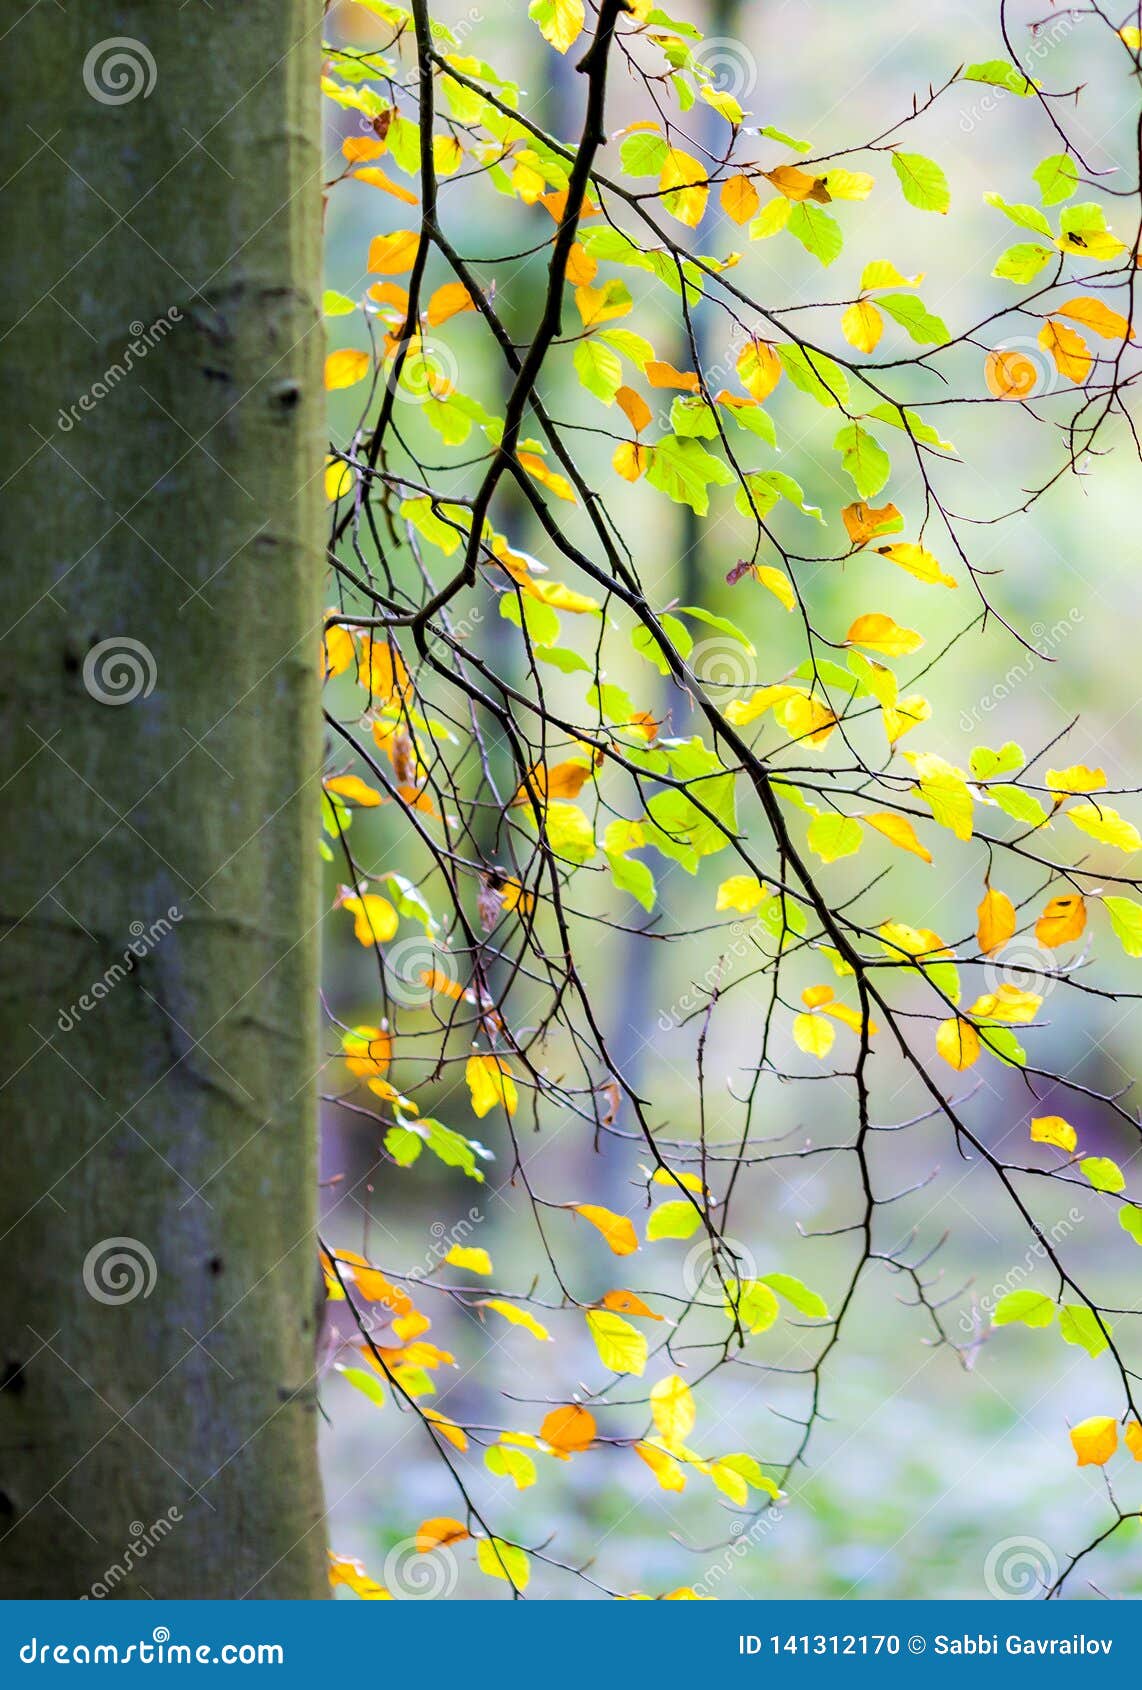 Relaxing And Peaceful Scene In The Forest With Sense For Balance And Tranquility Stock Photo Image Of Sunny Sense